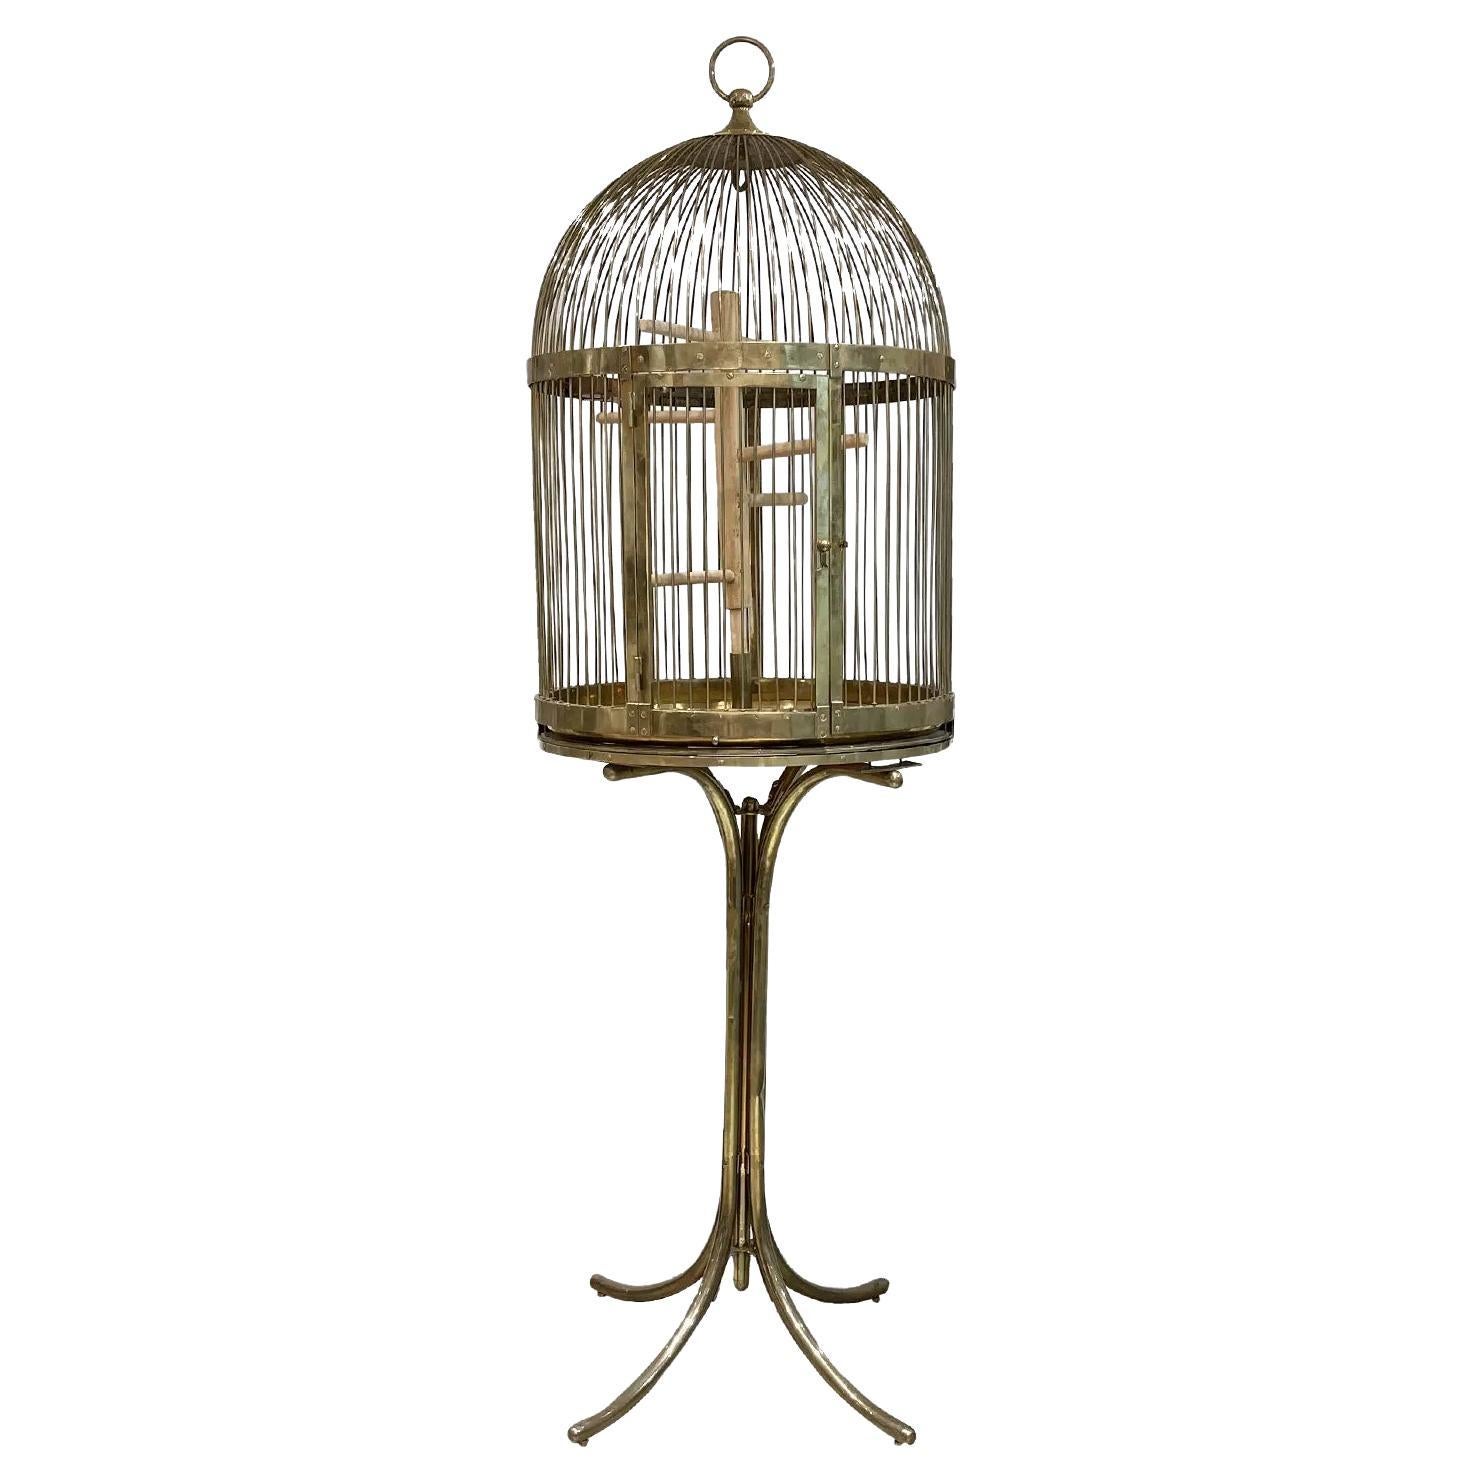 19th Century Austrian Large Antique Polished Brass Birdcage by Josef Denk For Sale